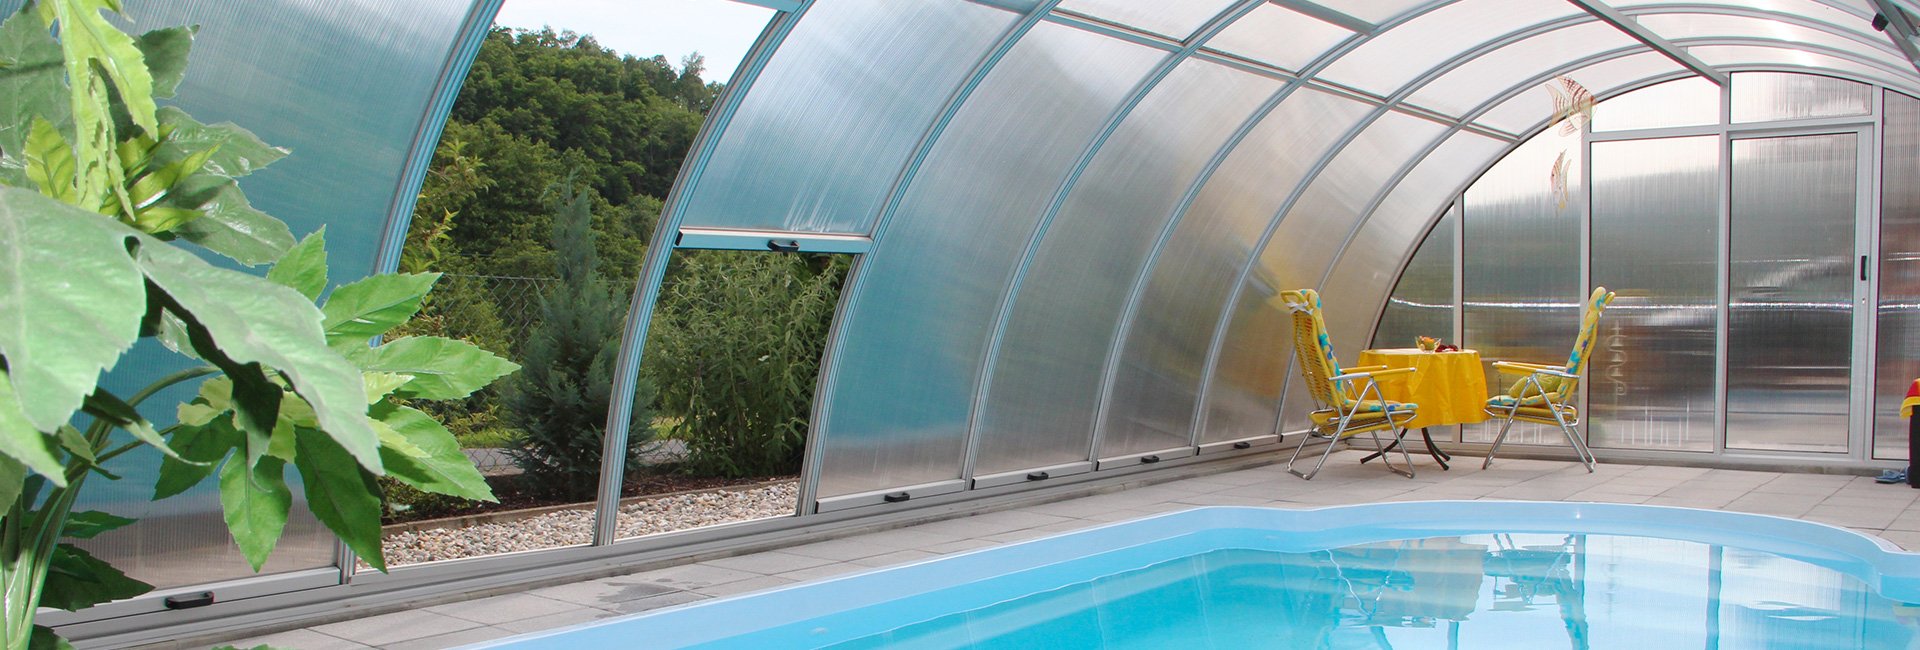 Swimming pool enclosures from Hoklartherm